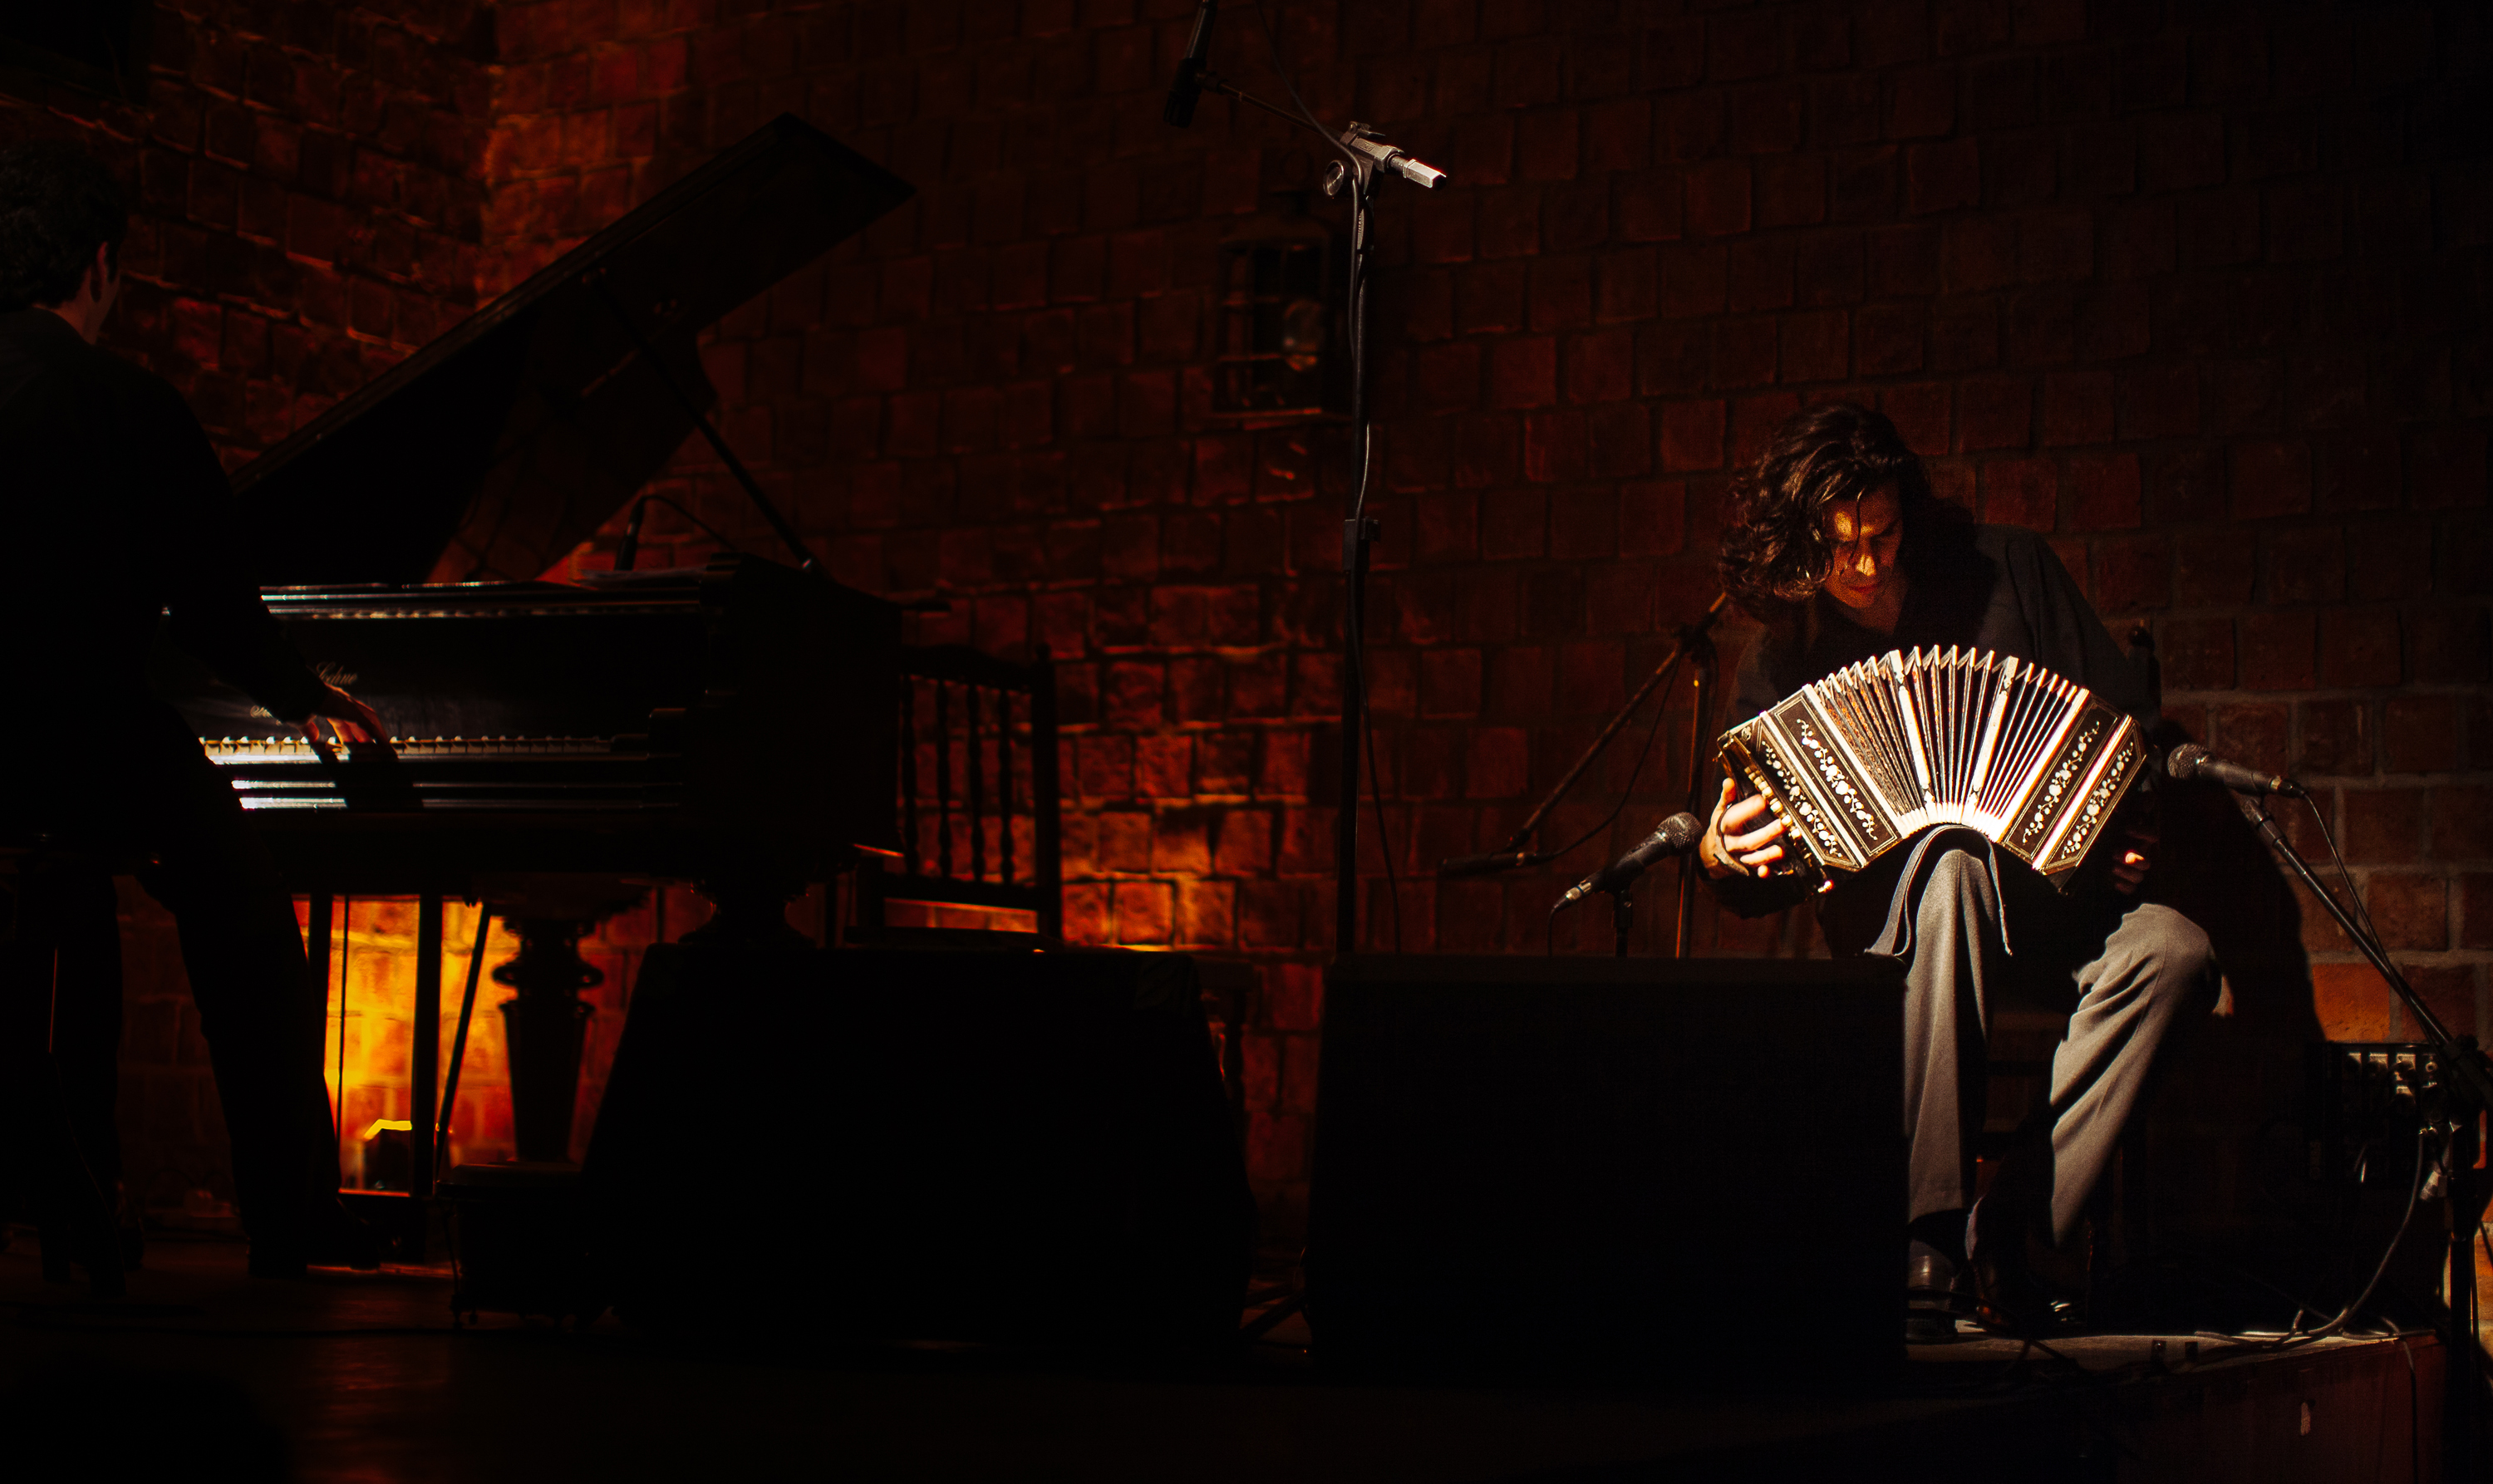 A beam of light illuminates the bandoneon and bandoneonista during a performance 